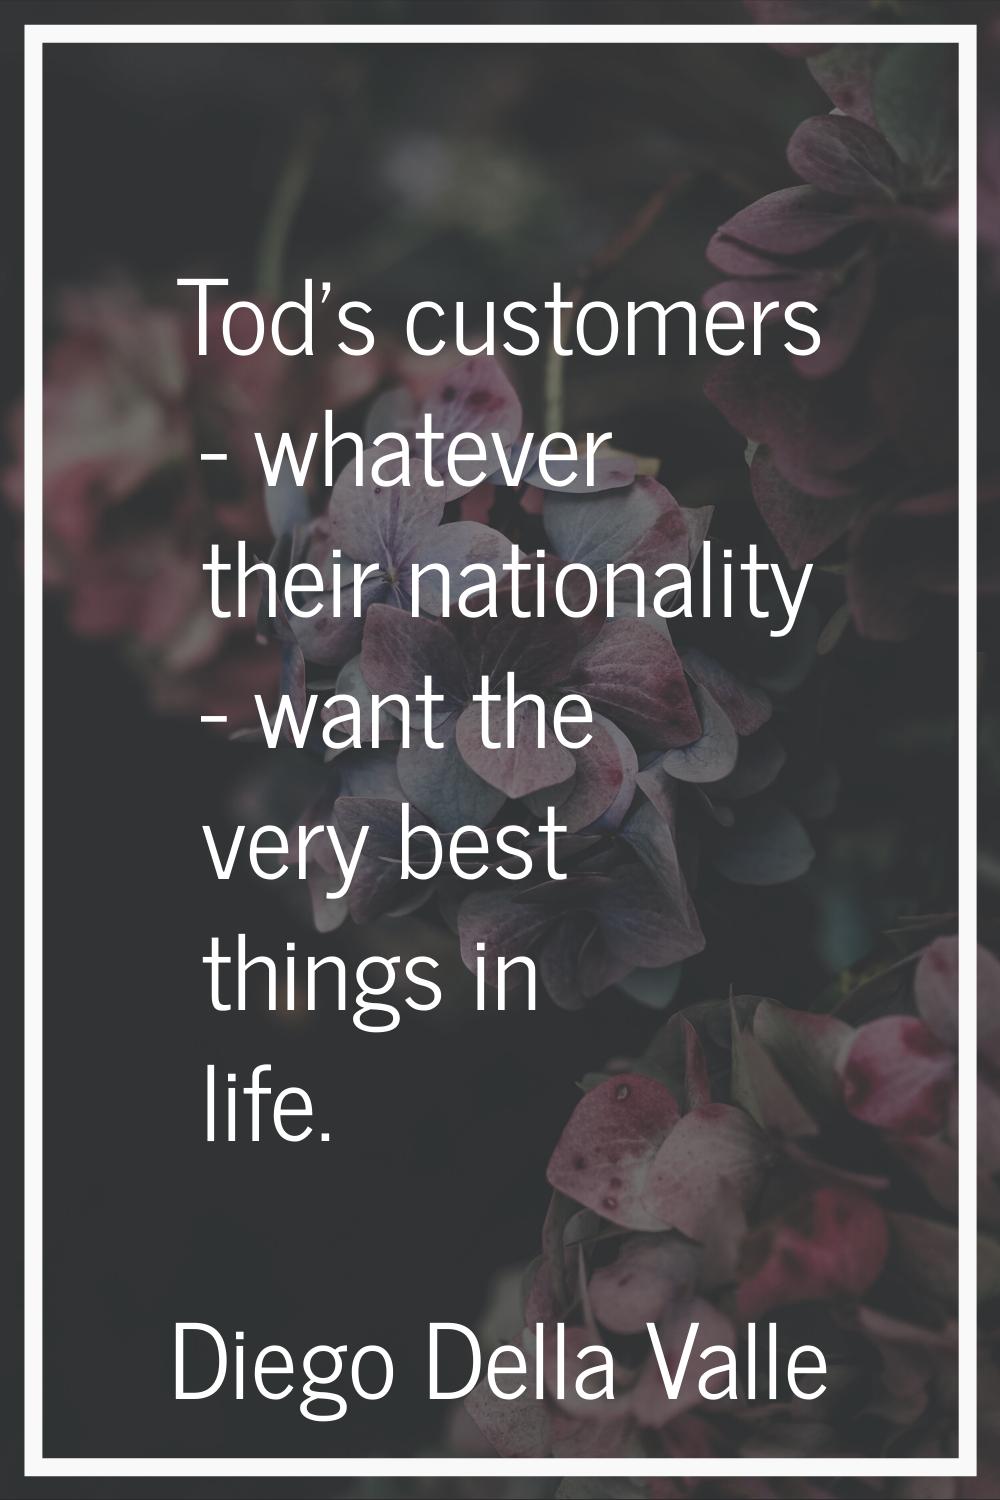 Tod's customers - whatever their nationality - want the very best things in life.